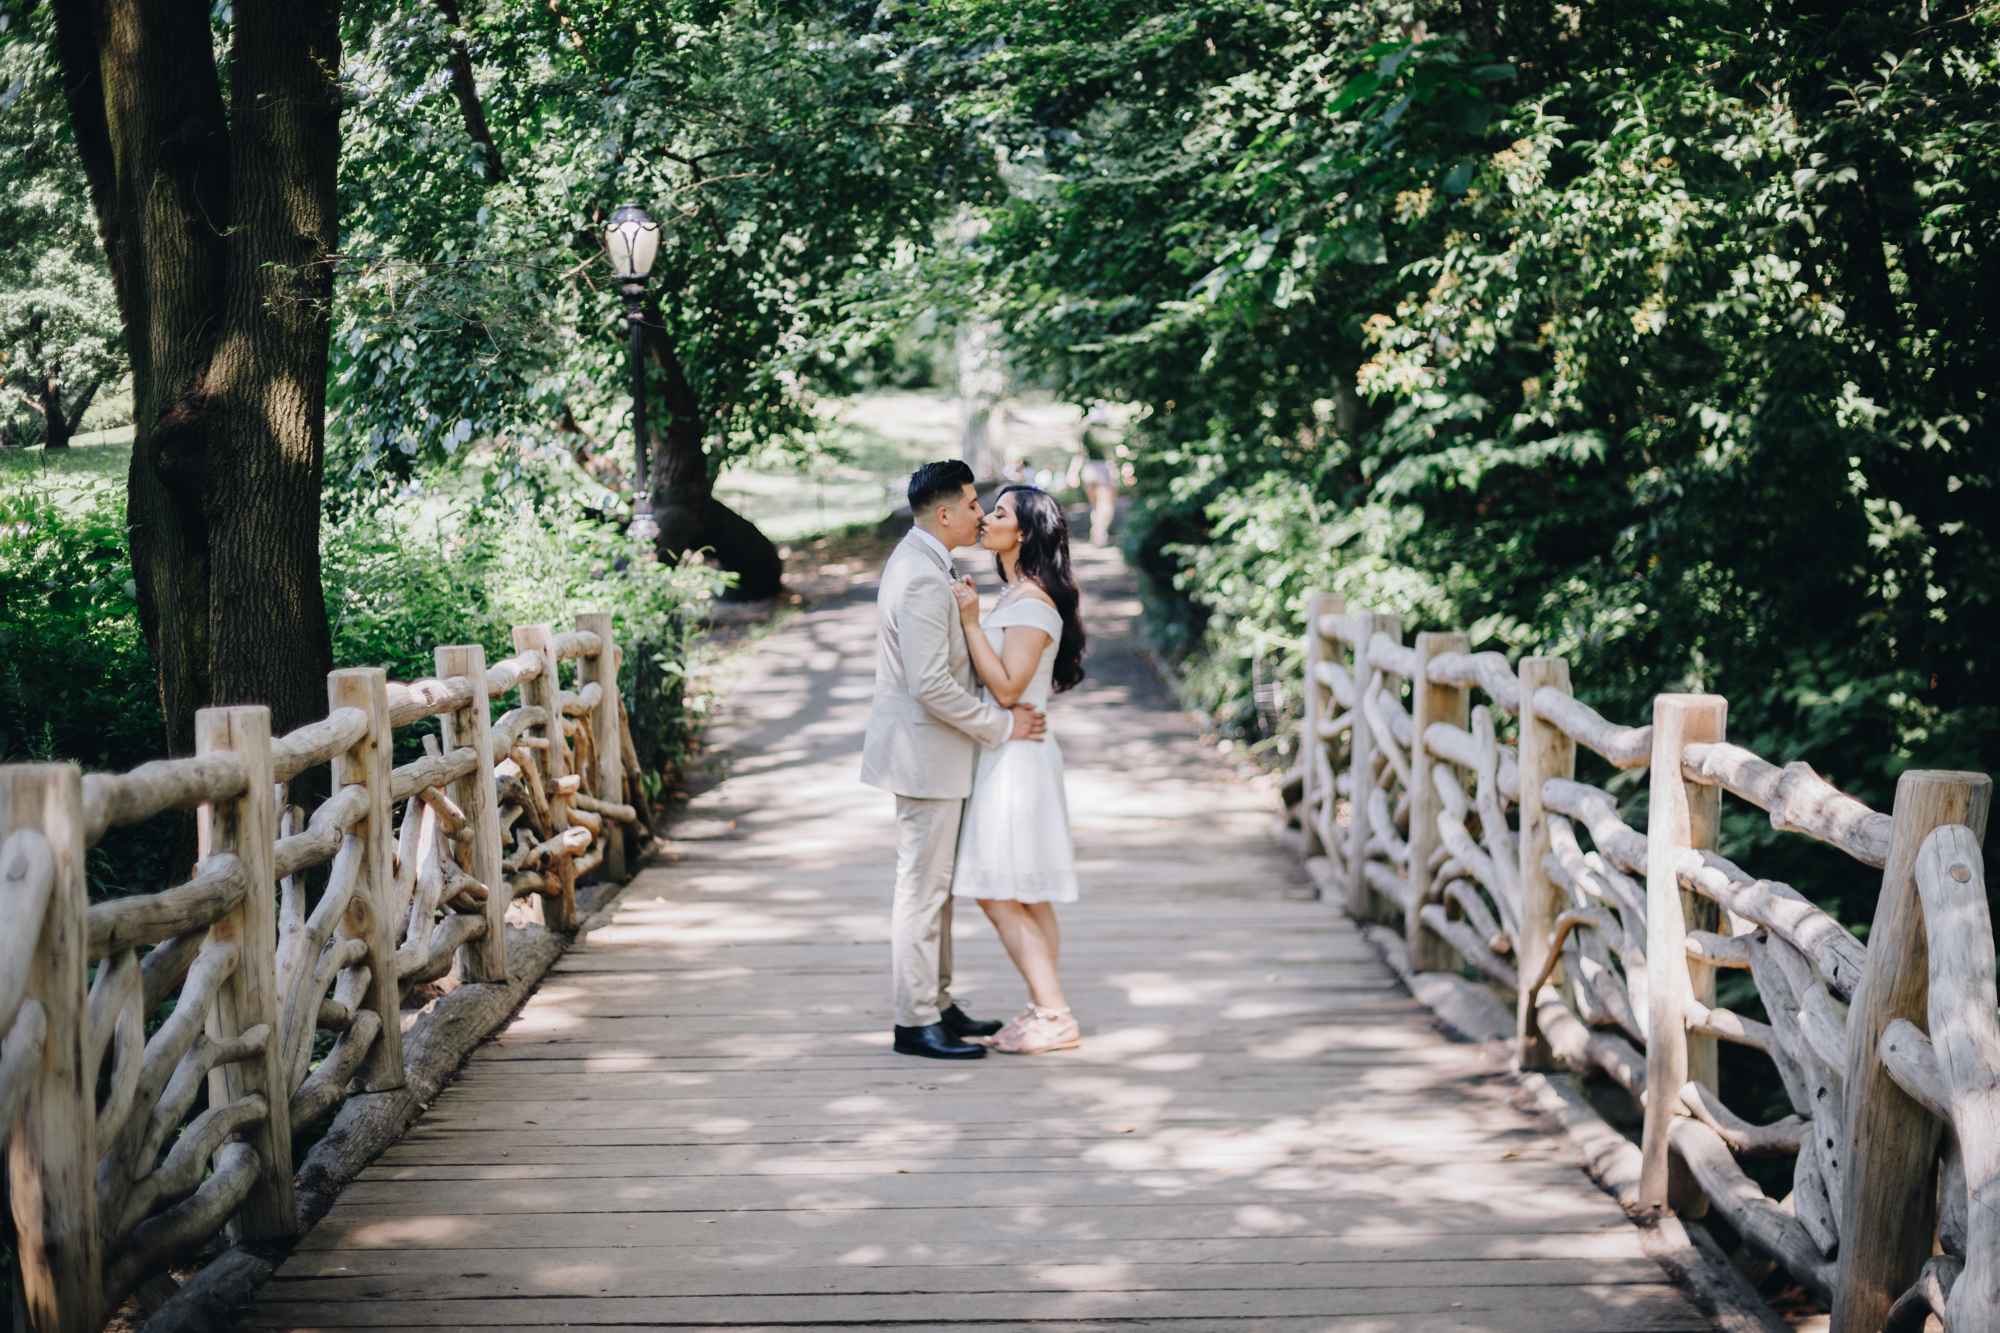 Stunning Locations in Central Park for Engagement Photography